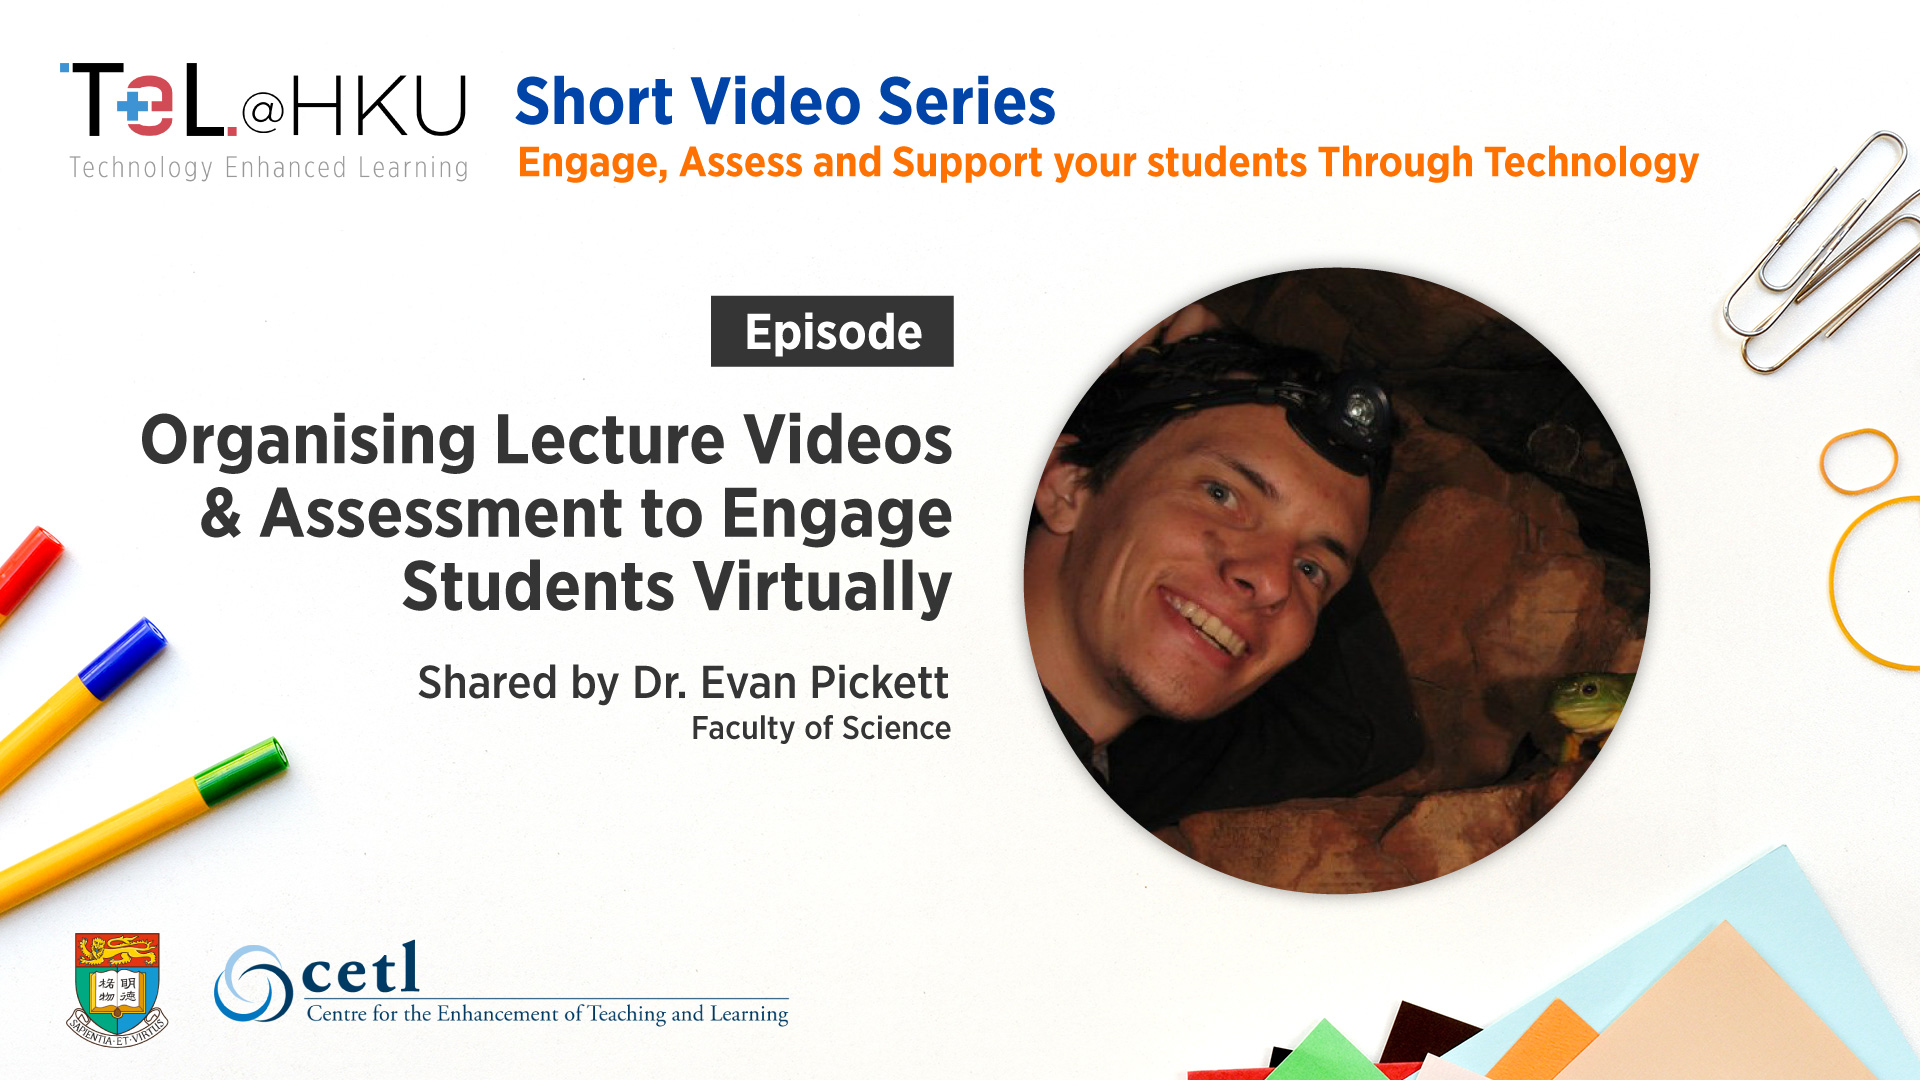 TeL@HKU Short Video Series – Organising Lecture Videos and Assessment to Engage Students Virtually shared by Dr. Evan Pickett